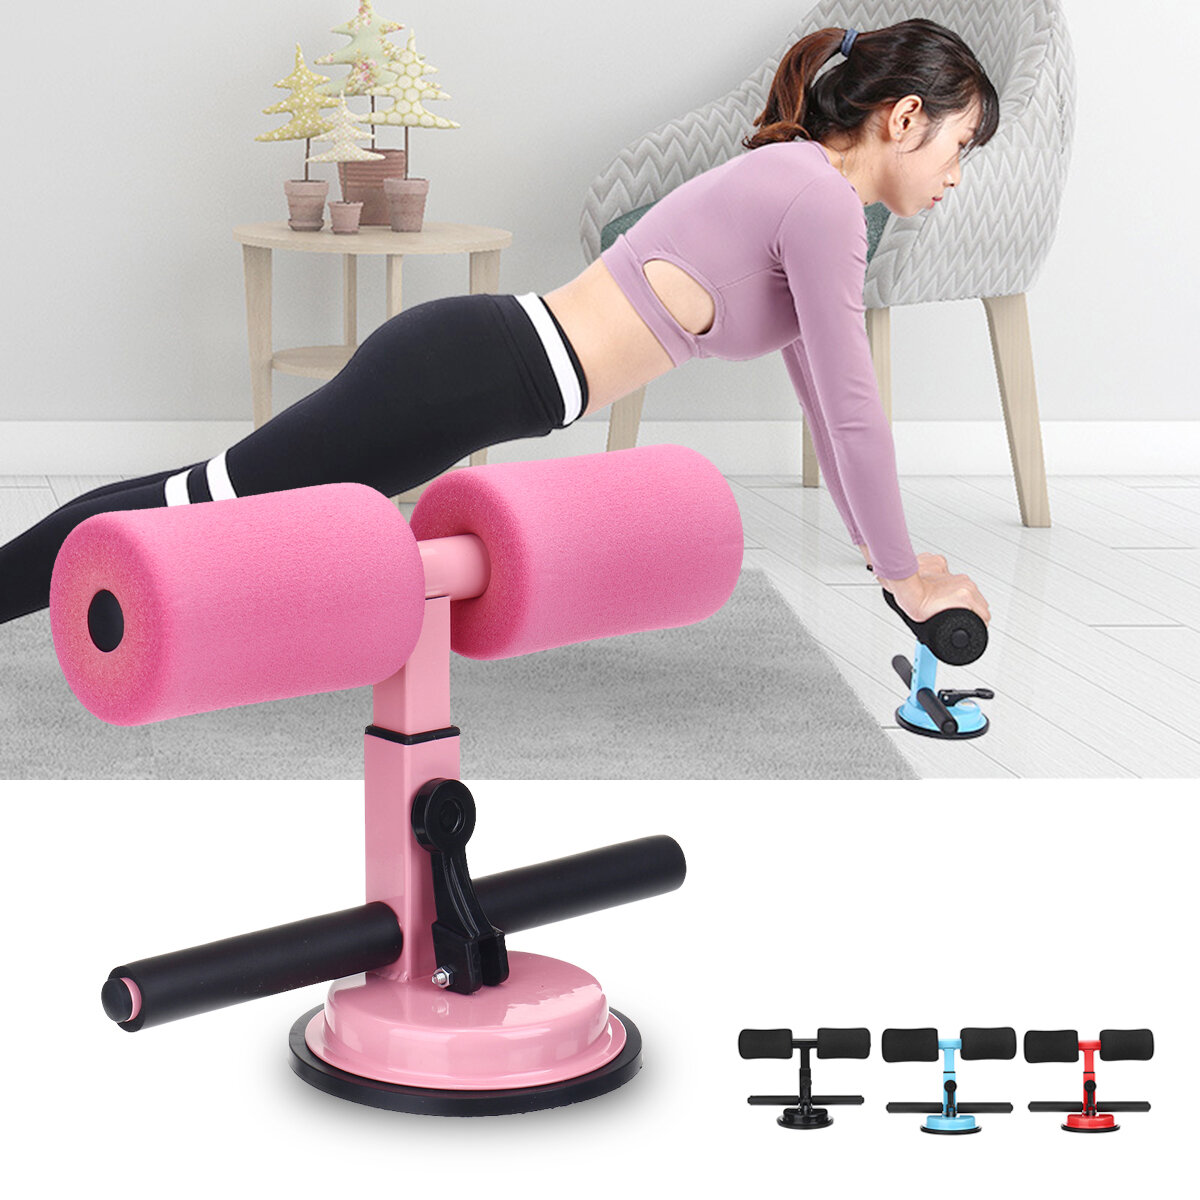 Sit-up Assistant Device 4 Levels Adjustable Self-Suction Sit-ups Bar Fitness Abdominal Muscle Traini